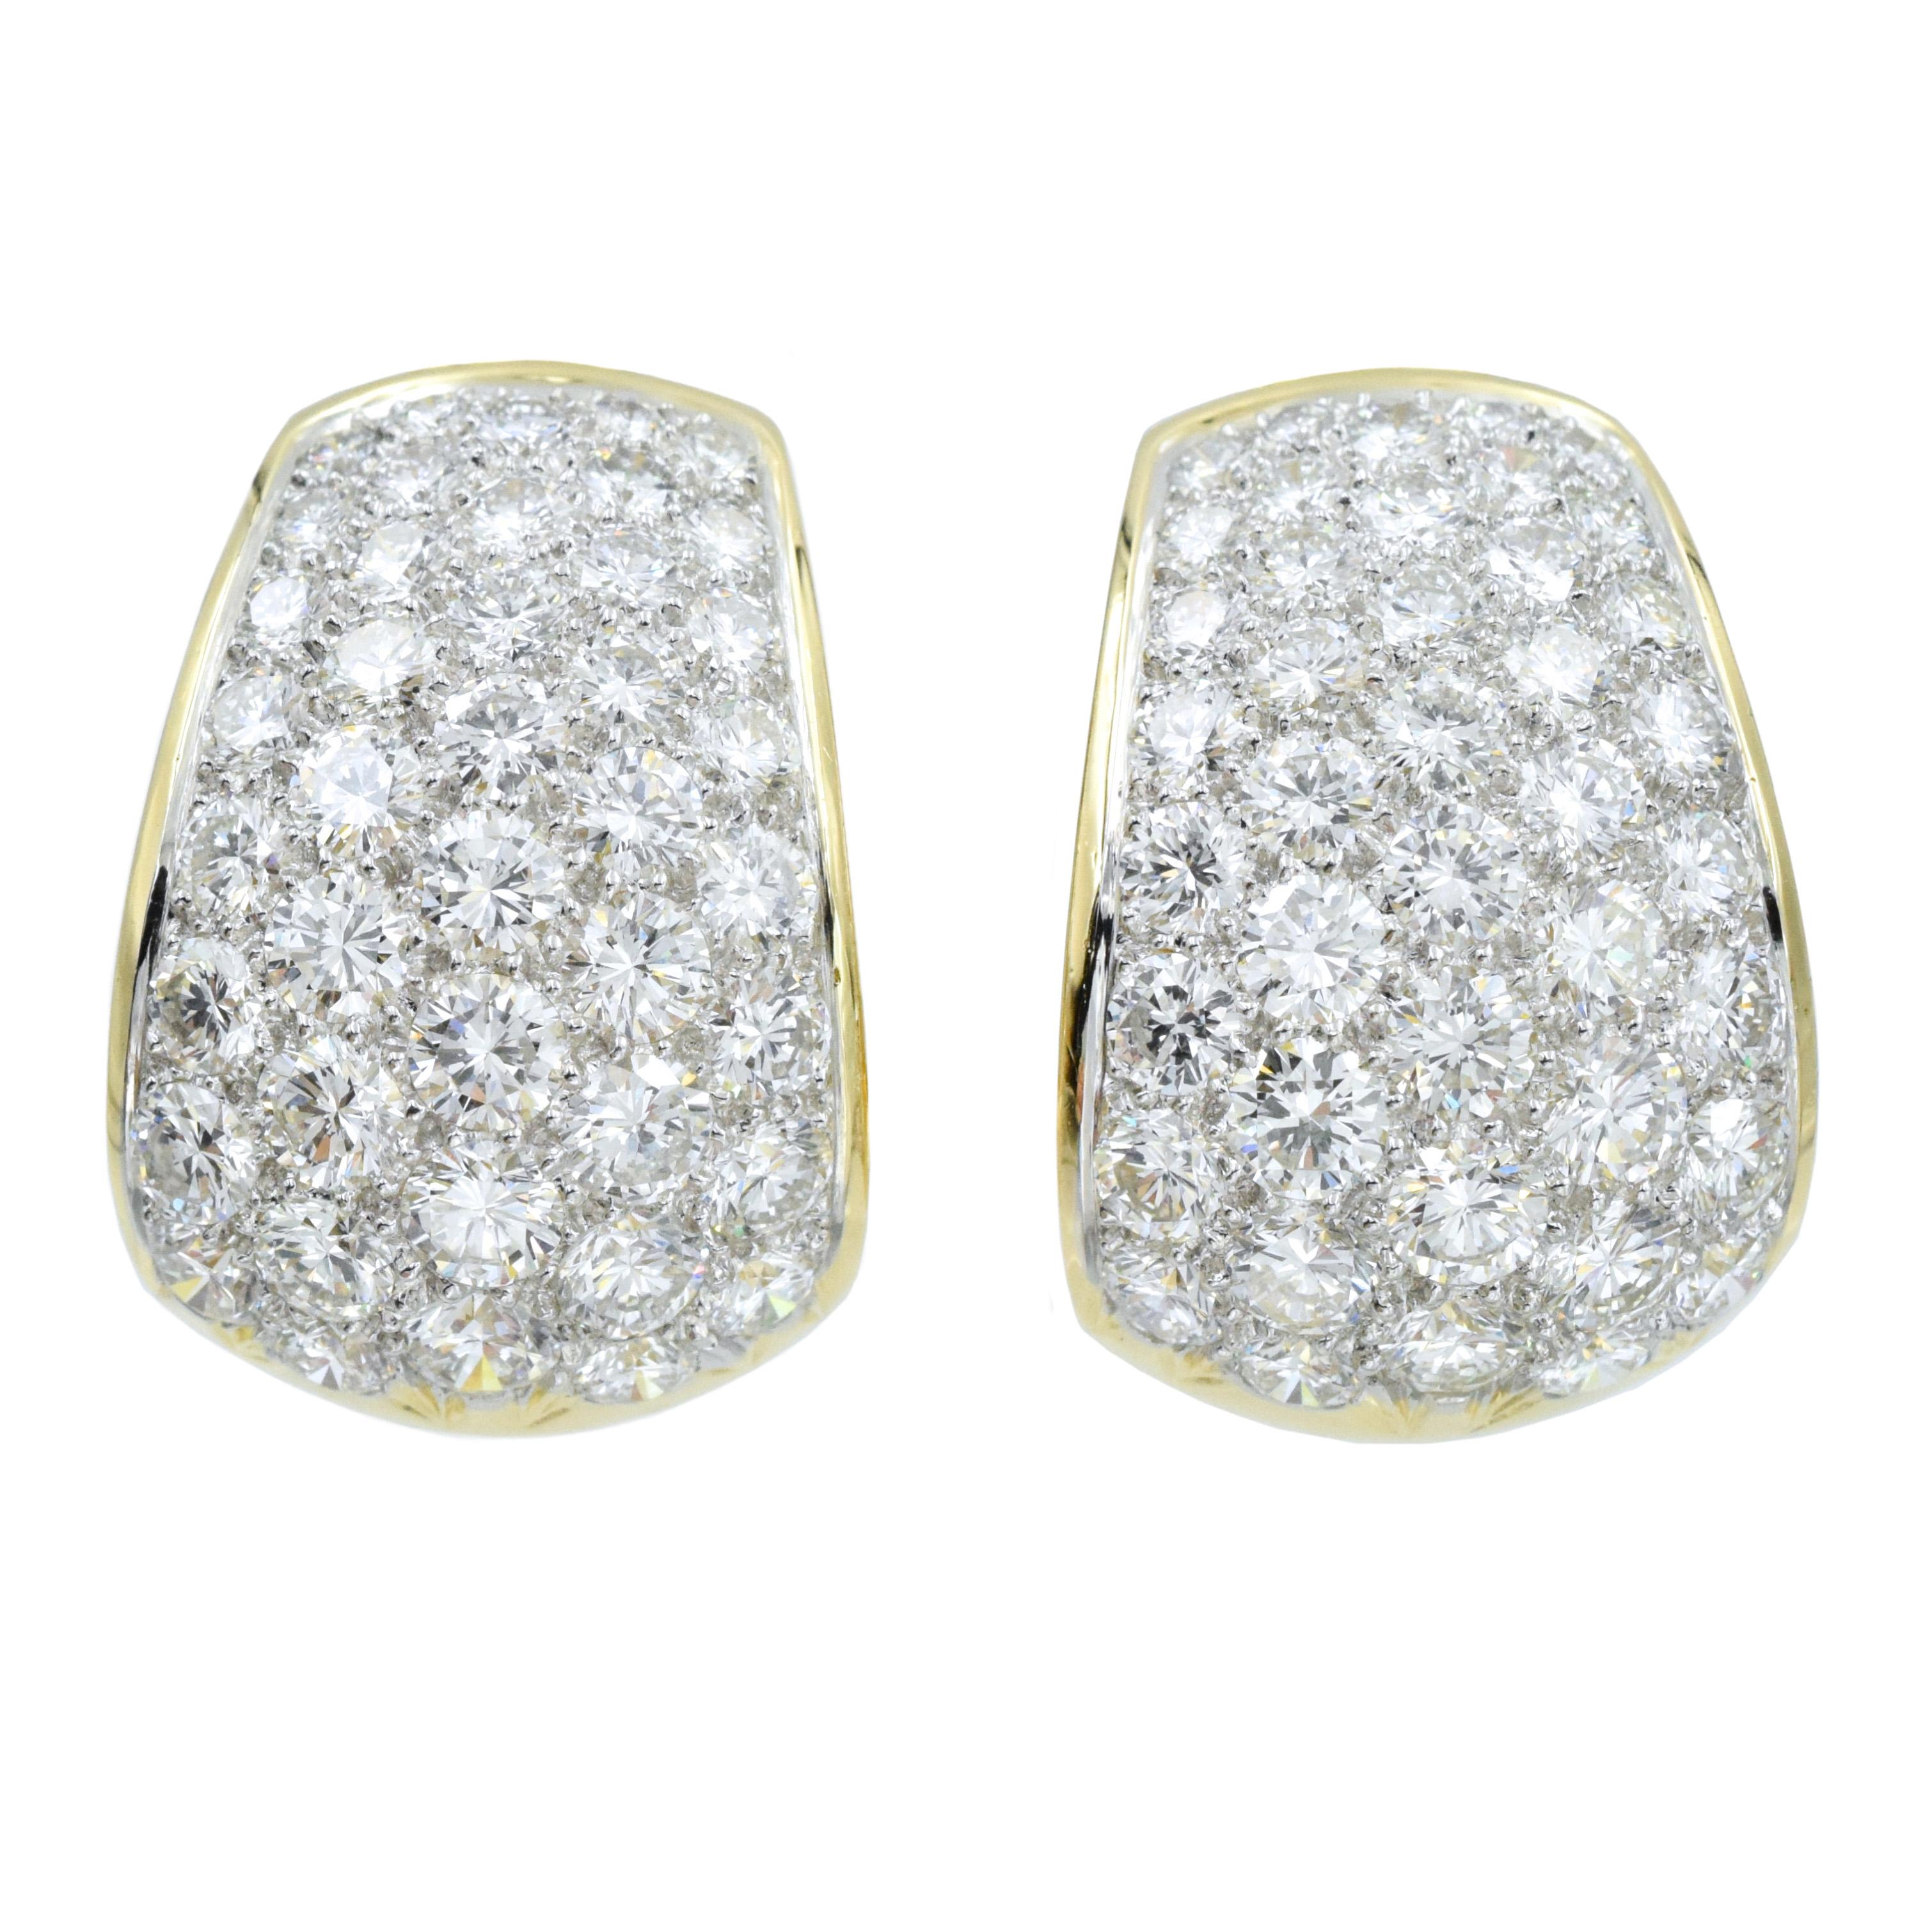 David Webb Diamond and Yellow Gold Hoops. This pair of earrings has 74 round brilliant diamonds weighing approximately 12.00 carats  all set in platinum with 18k yellow gold border.
Singed Webb, Plat. 18K.
 Measurements:   25mm x 18mm x 20mm. 